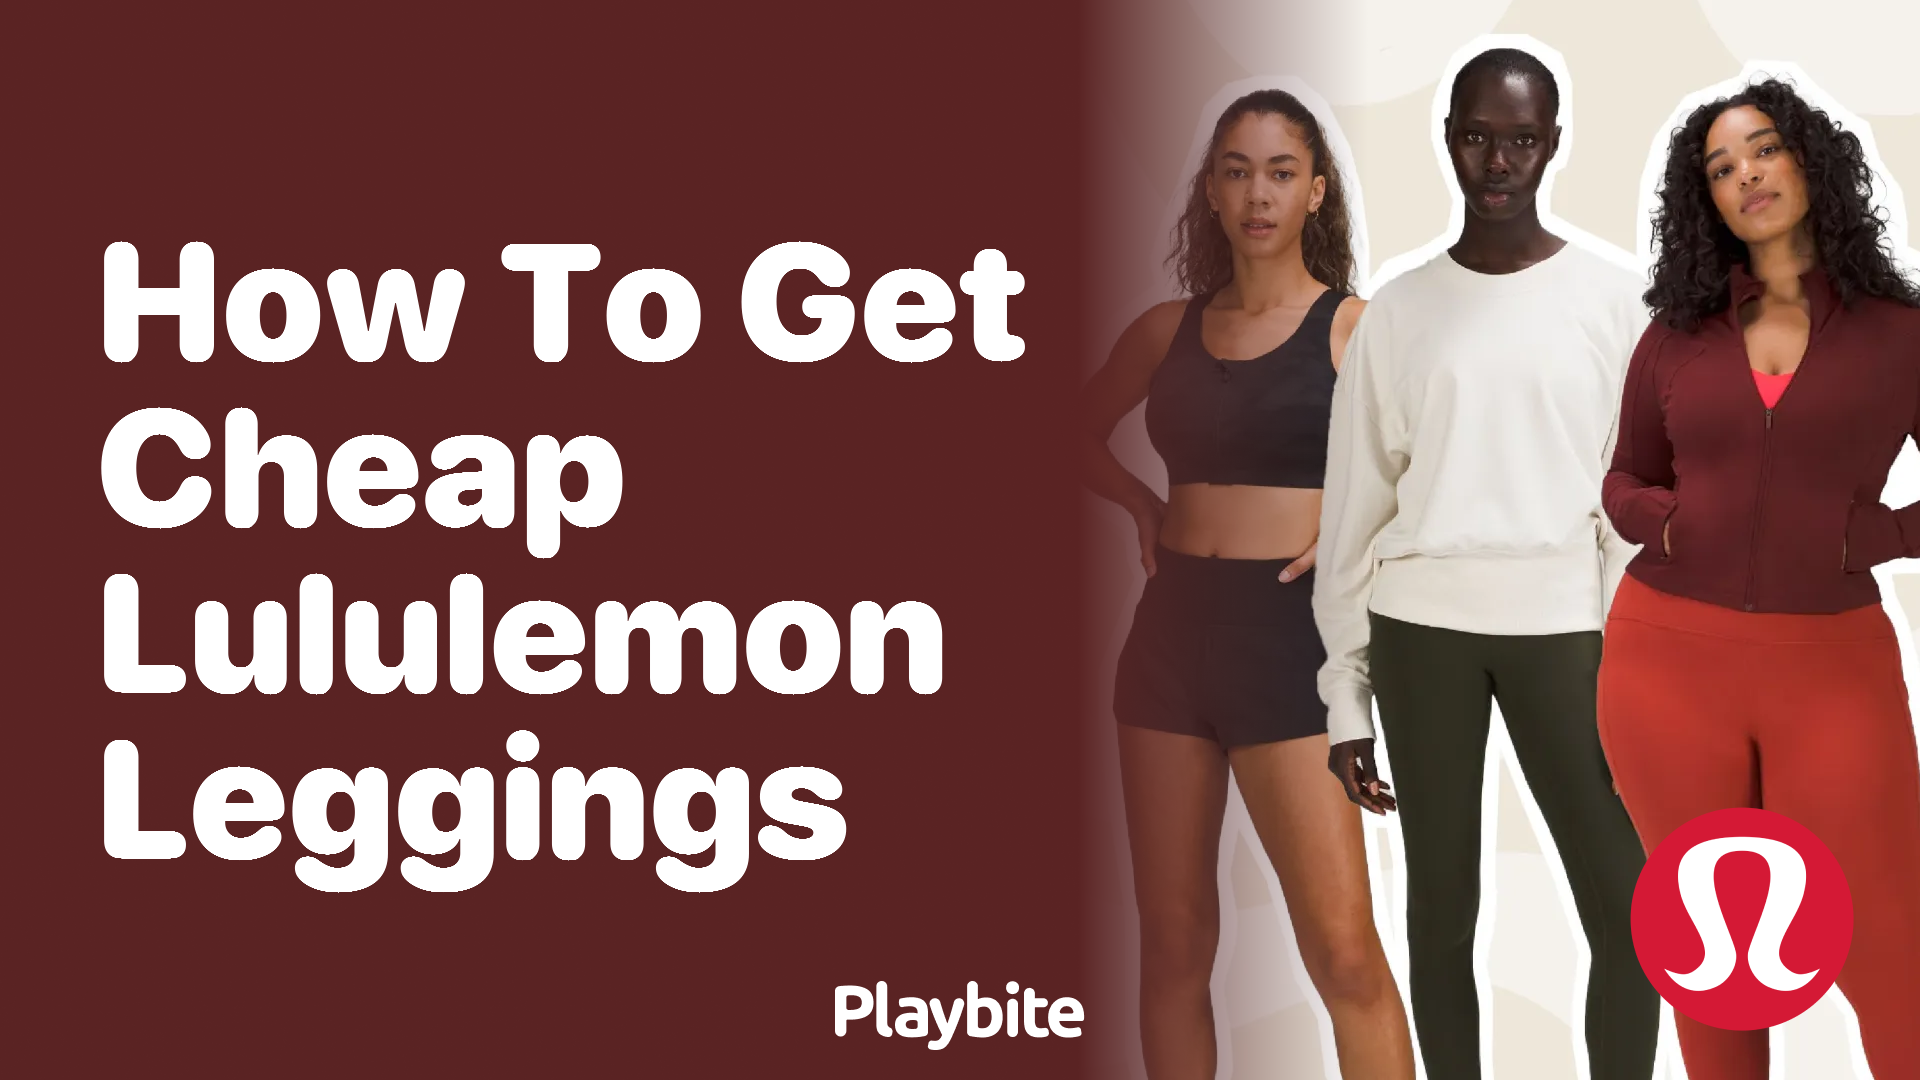 How to Get Cheap Lululemon Leggings: A Playful Guide - Playbite